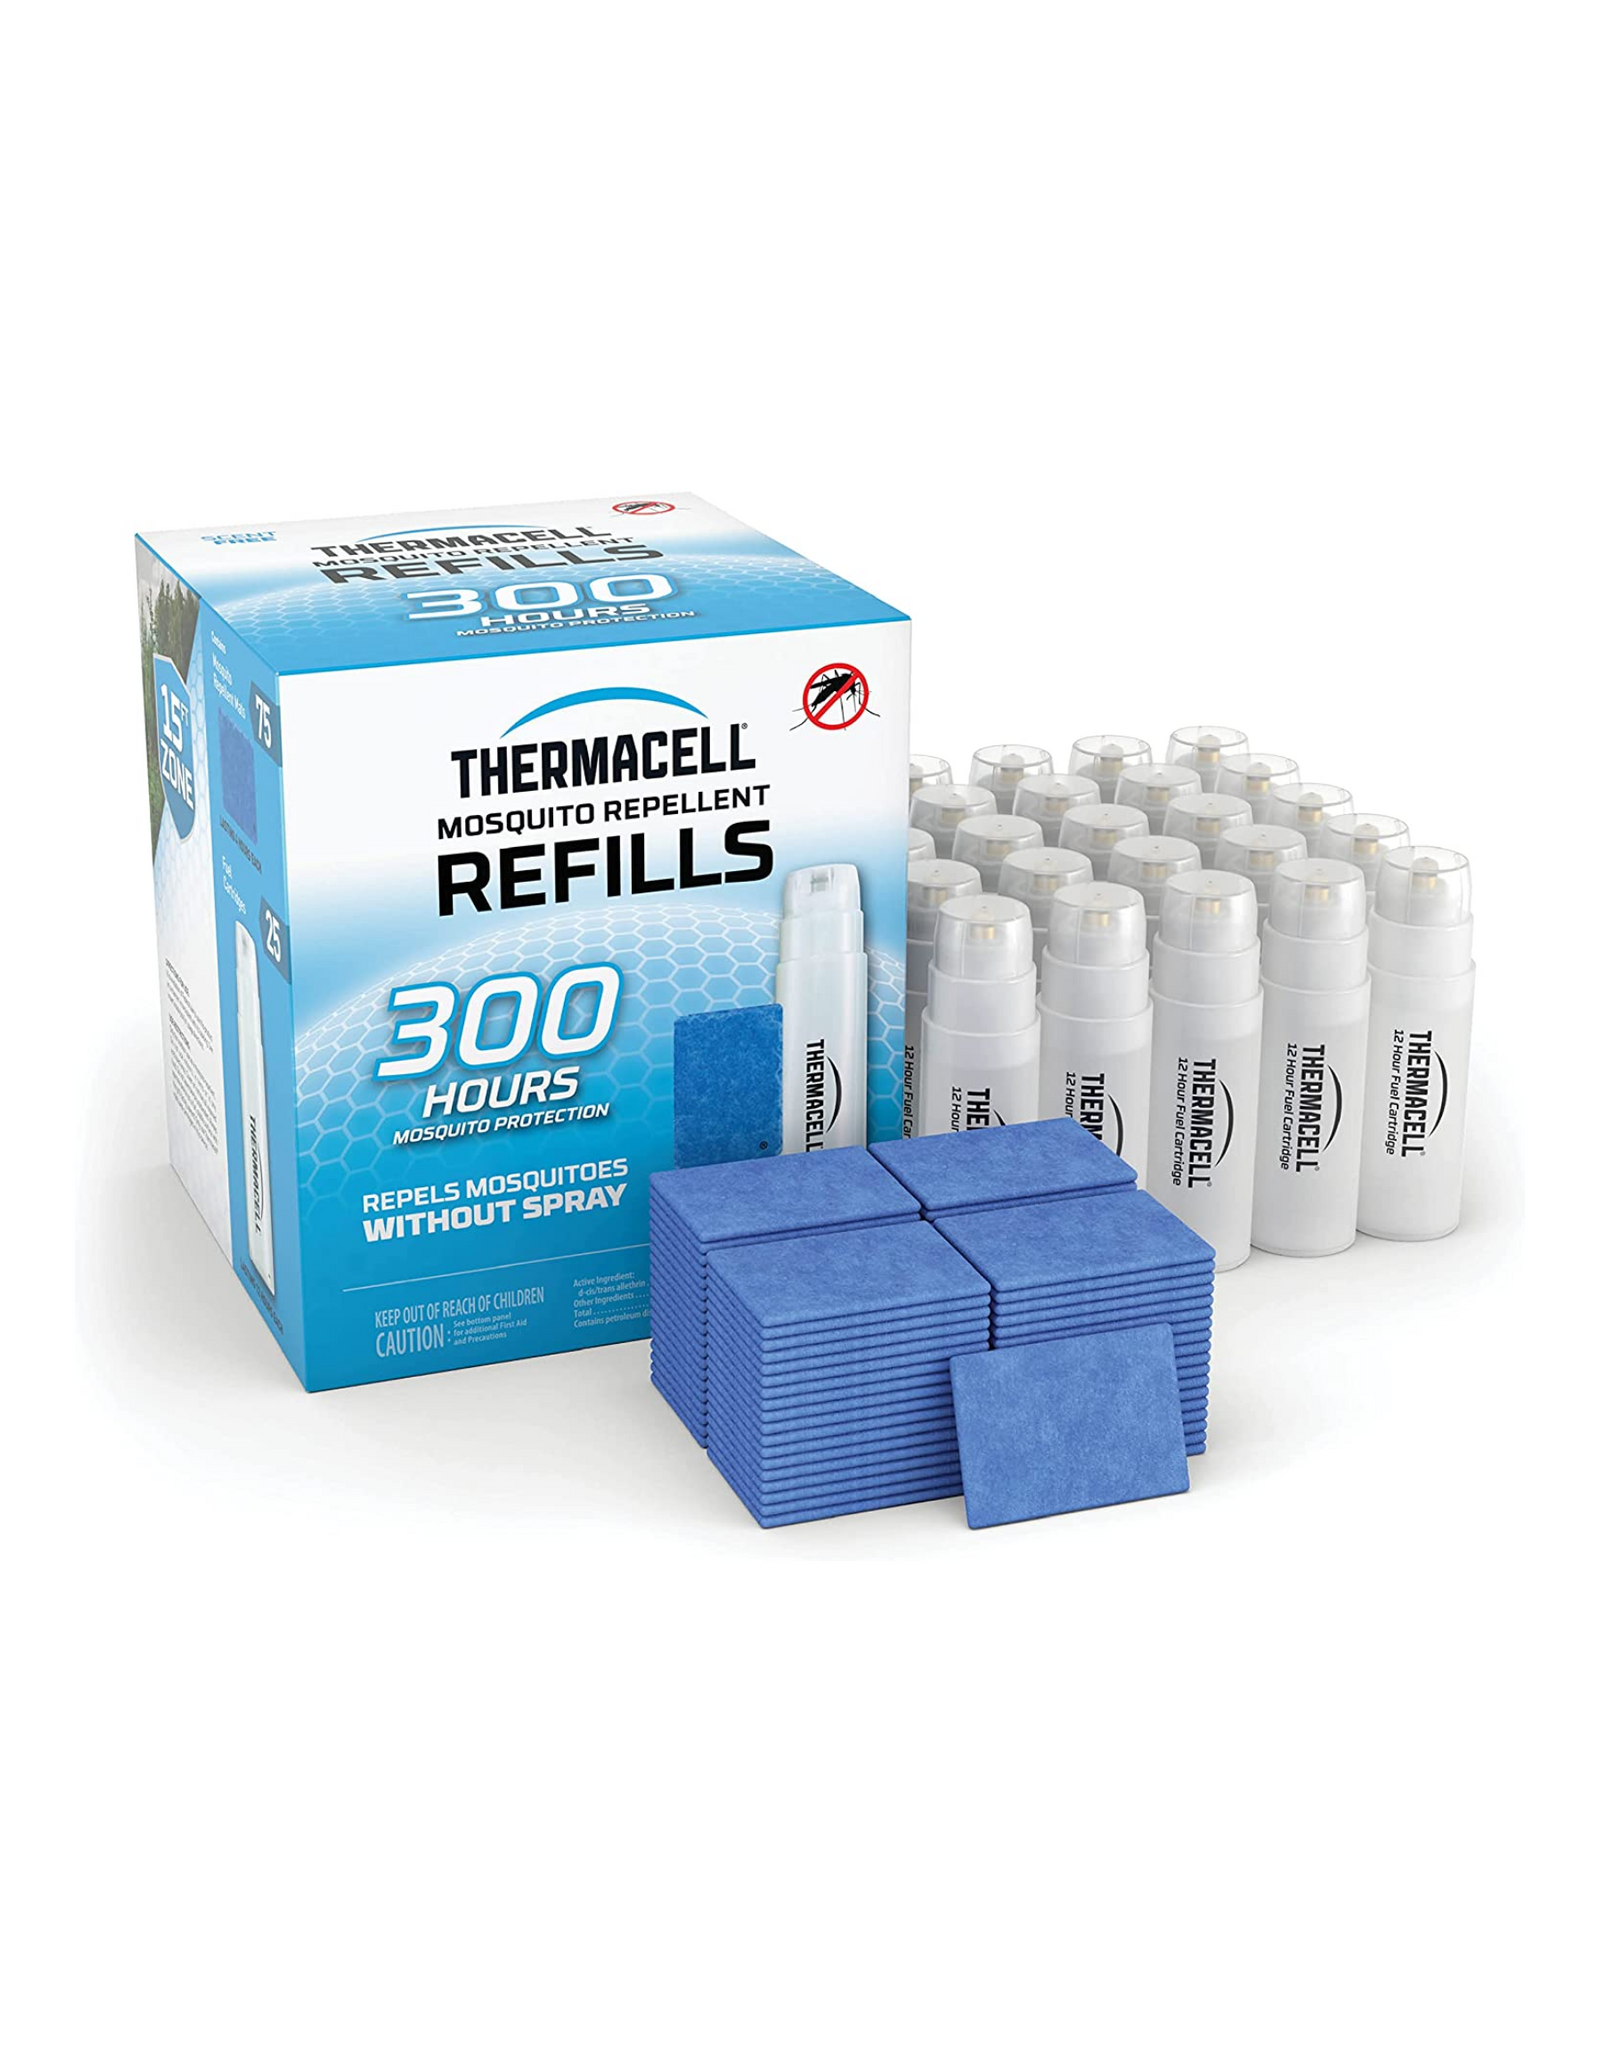 Thermacell Mosquito Repellent Refills, Compatible with Any Fuel-Powered Thermacell Repeller, 300 Hours Mosquito Protection, Original Scent-Free